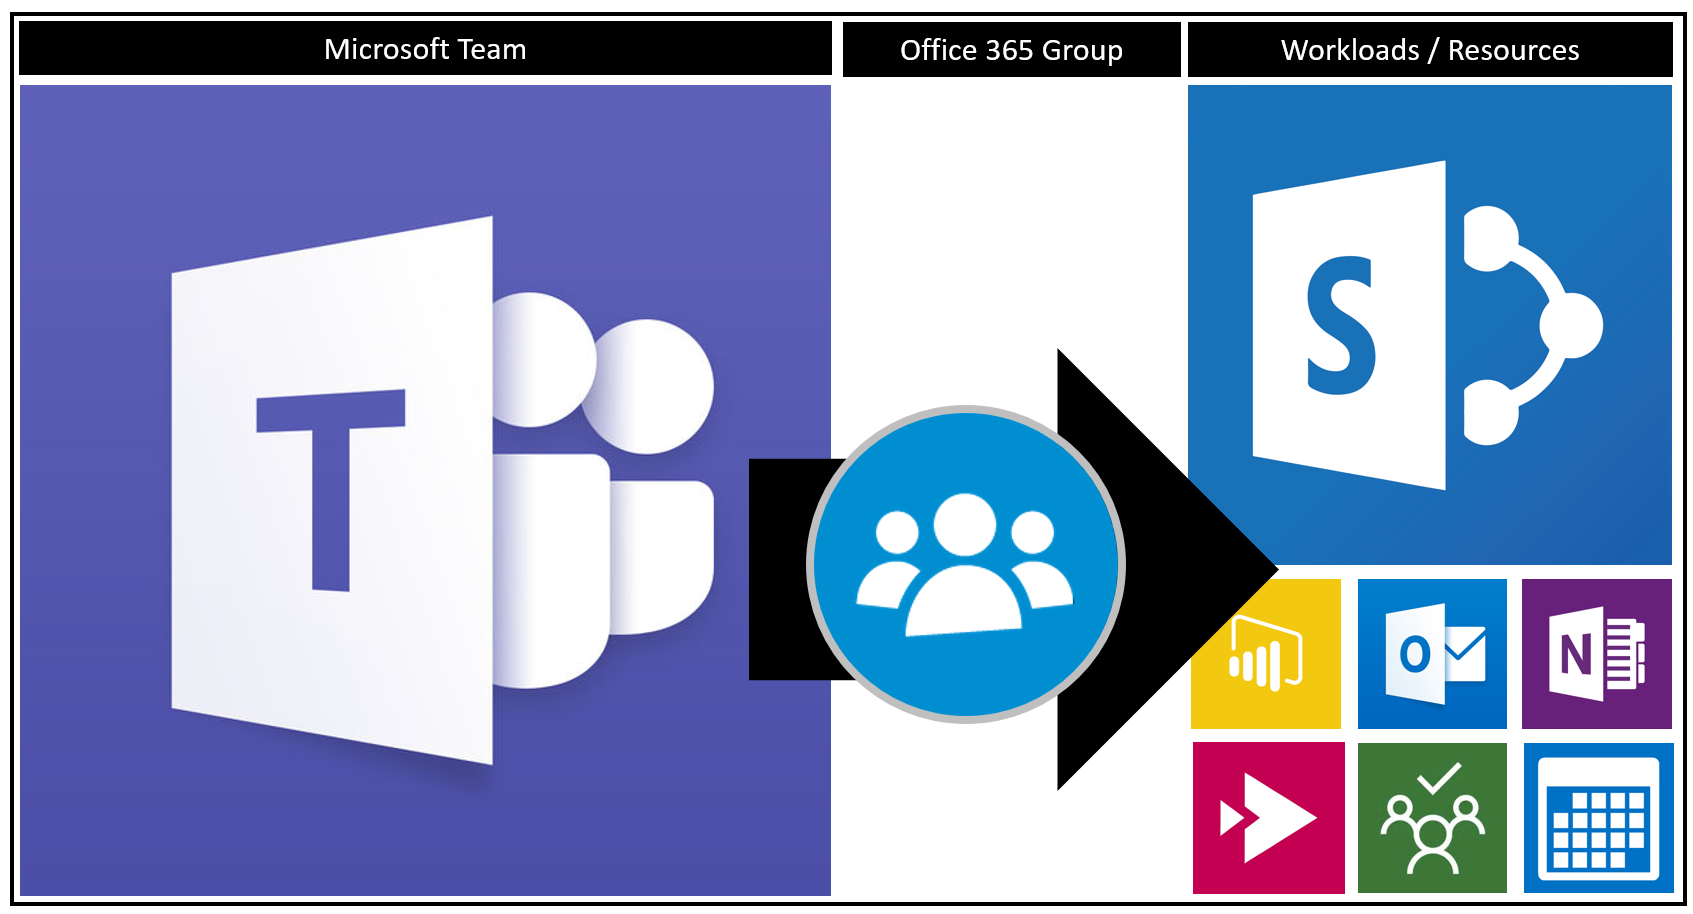 More than just chat - using Teams as a SharePoint front end to manage your small business documents - OnMSFT.com - April 23, 2020